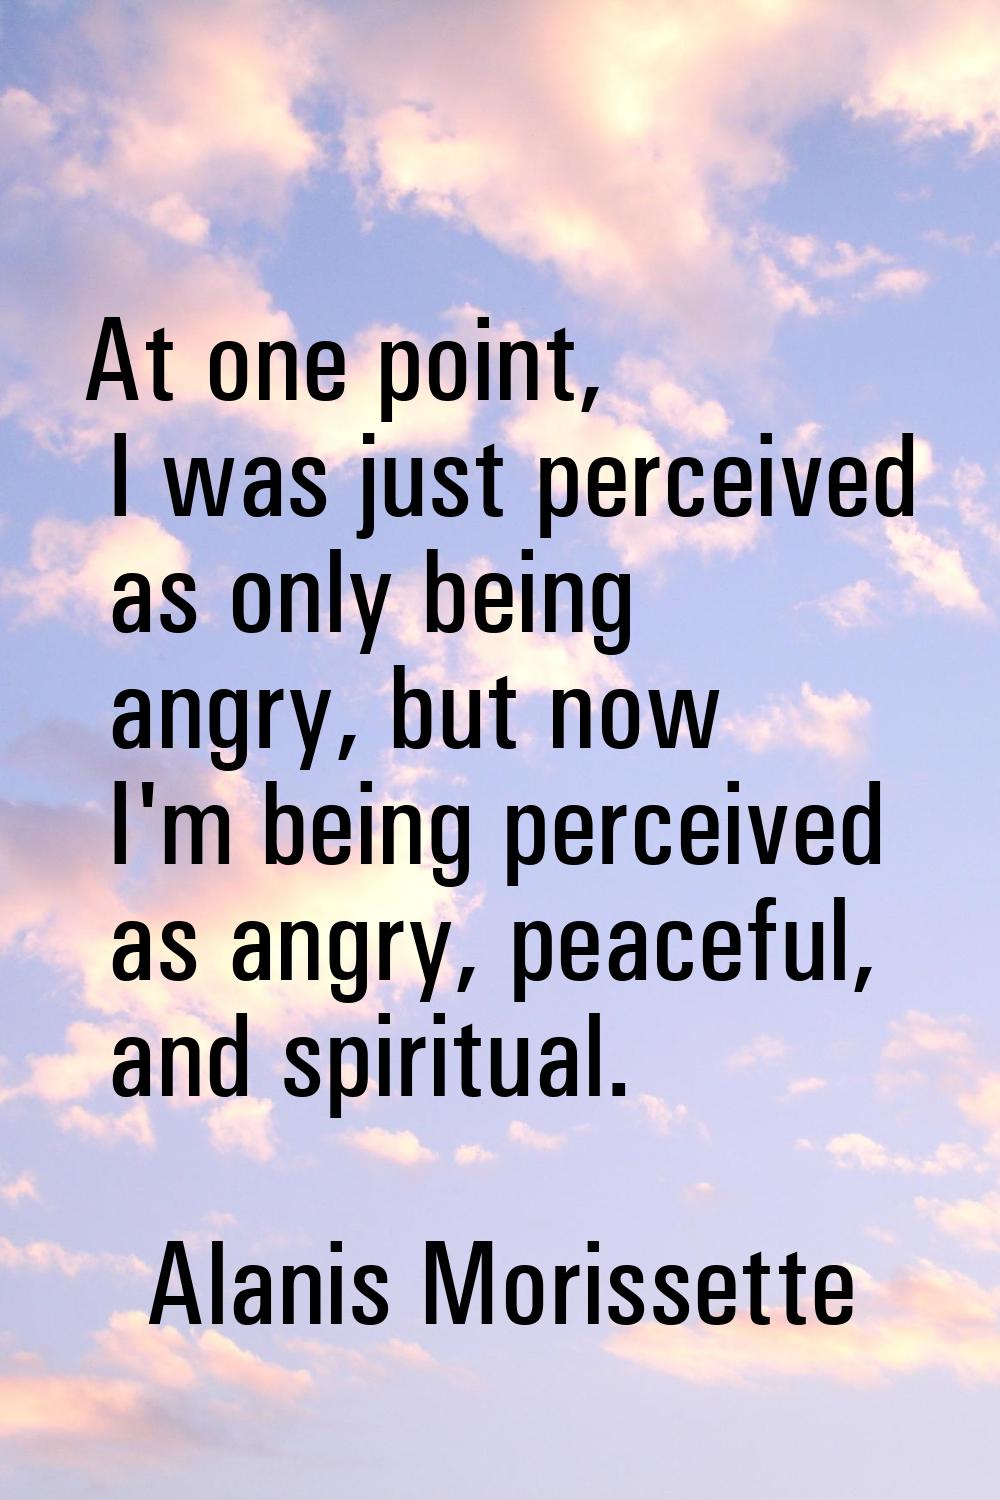 At one point, I was just perceived as only being angry, but now I'm being perceived as angry, peace